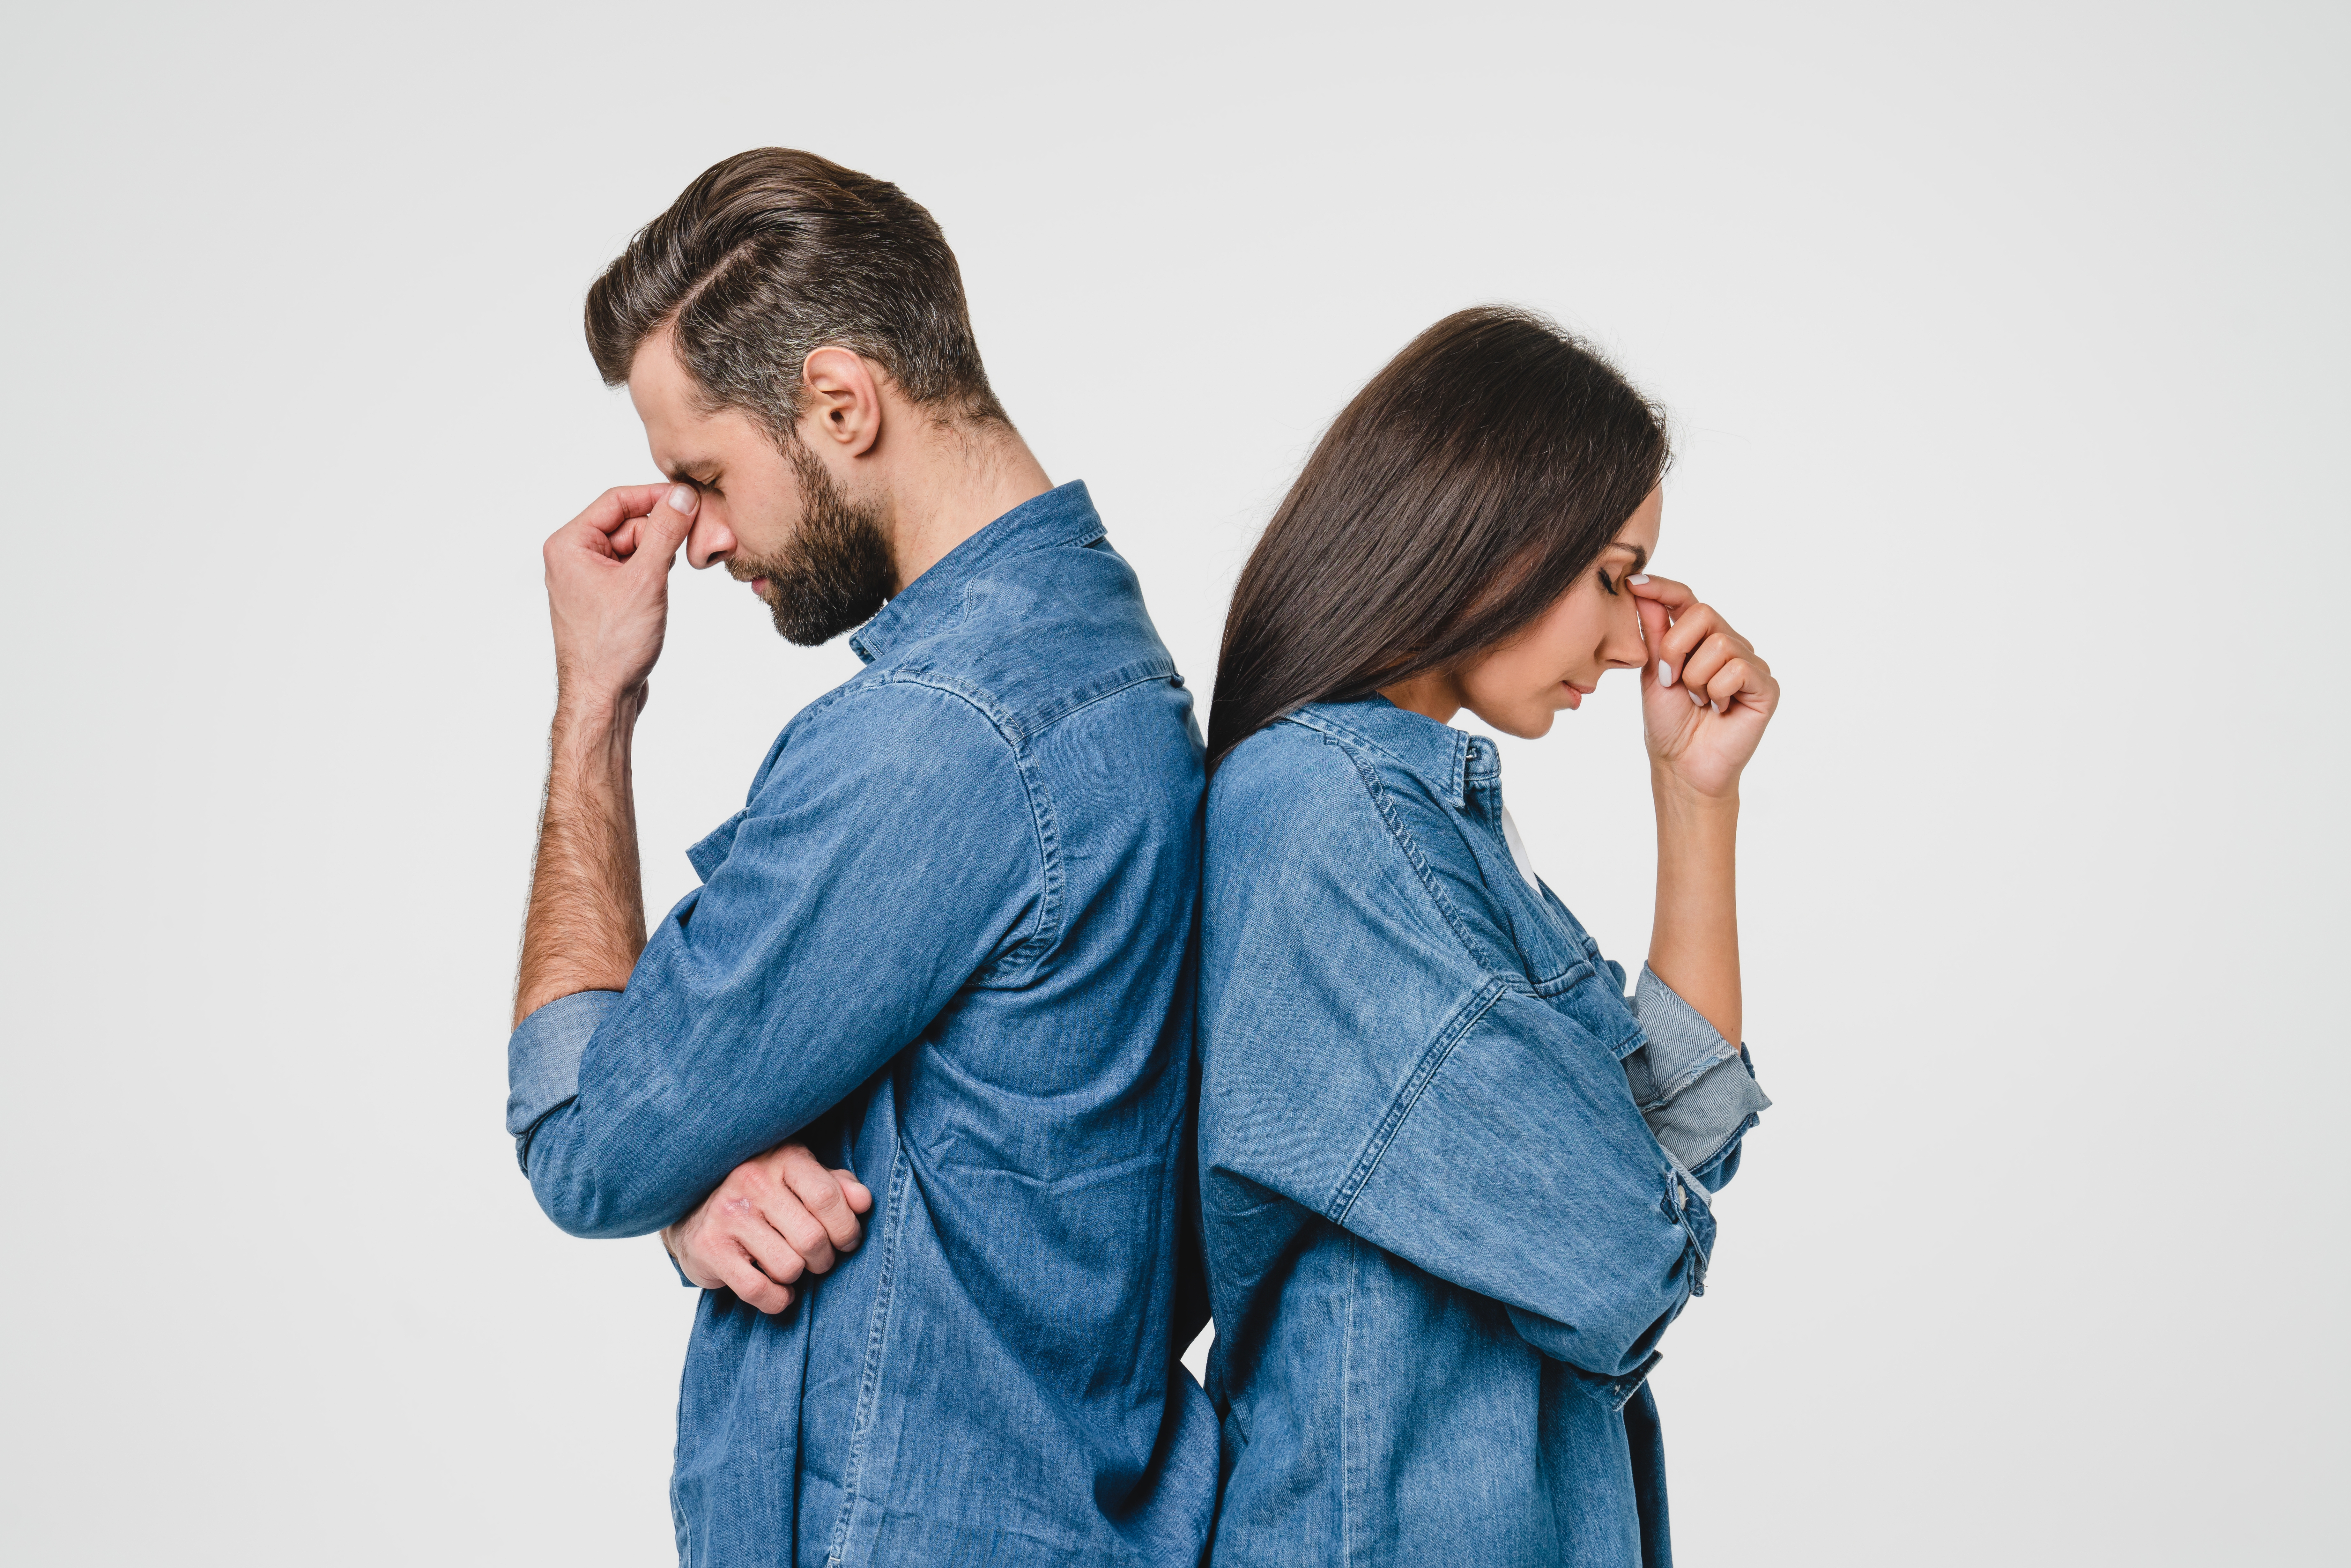 A man and woman standing back to back with their heads in their hands | Source: Shutterstock